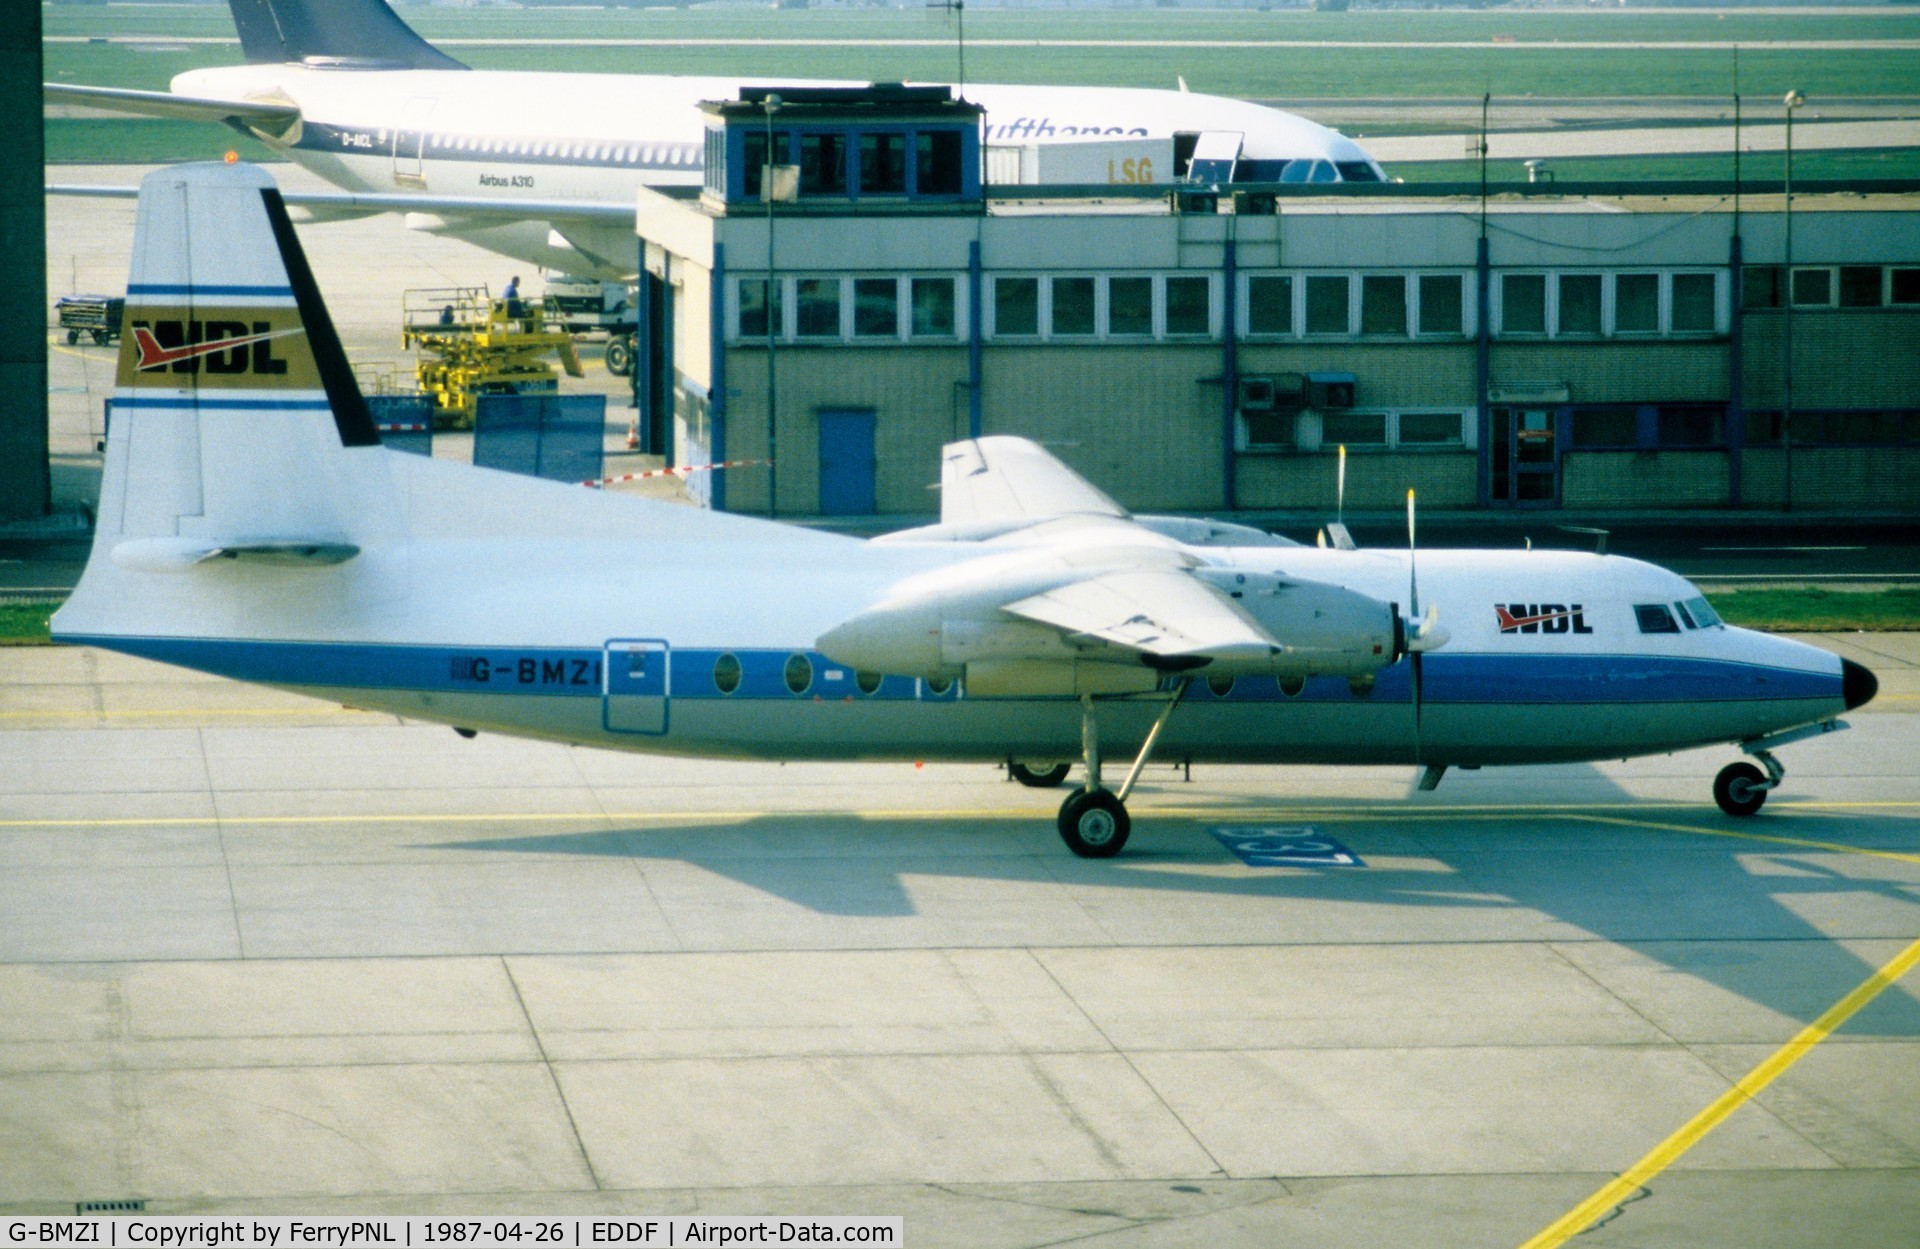 G-BMZI, 1958 Fokker F.27-100 Friendship C/N 10106, WDL F27 leased from Fortis Aviation